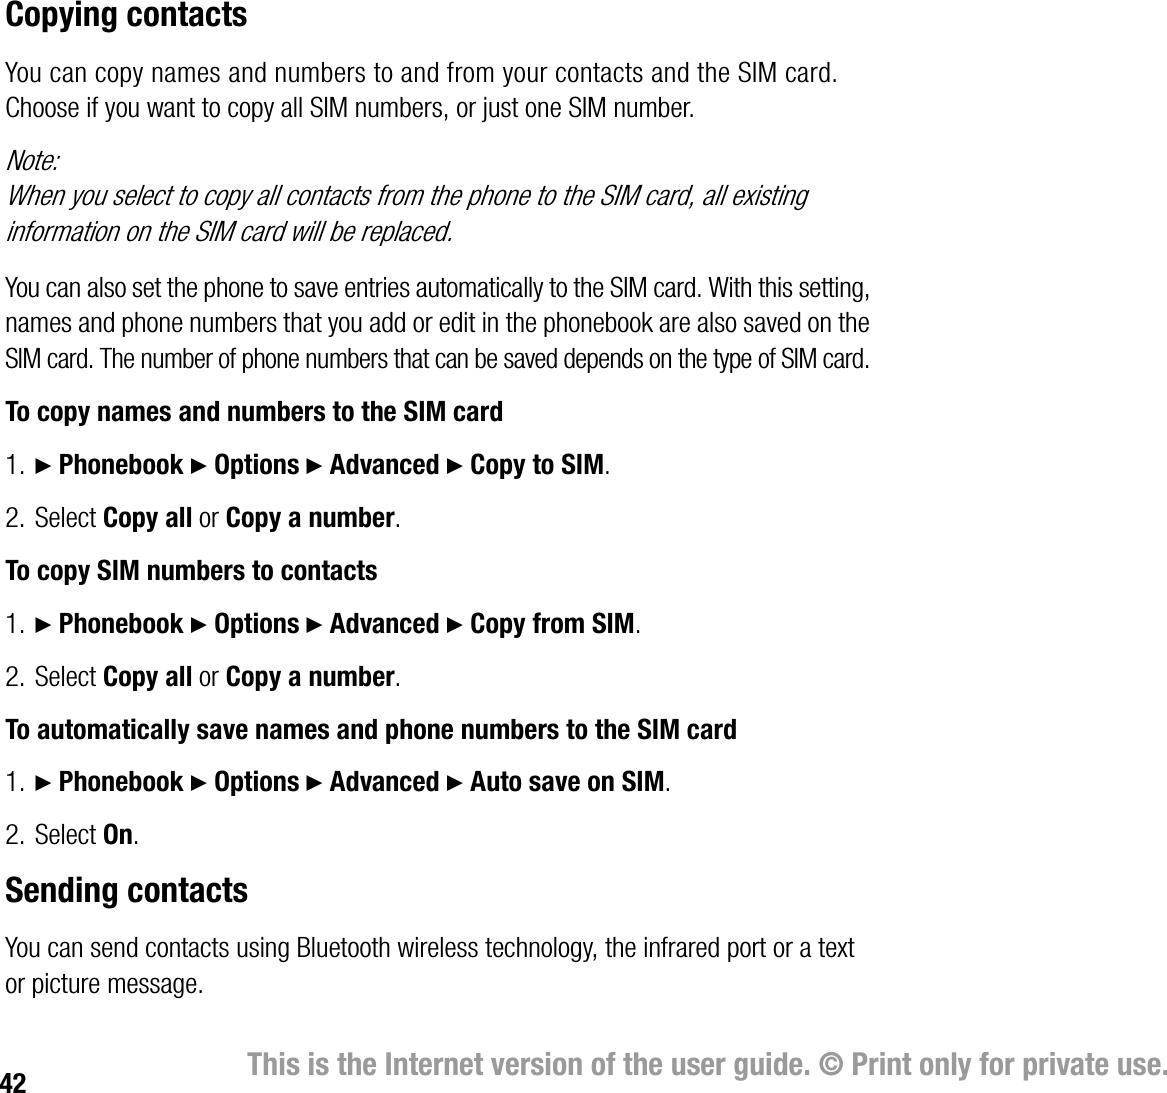 42 This is the Internet version of the user guide. © Print only for private use.Copying contactsYou can copy names and numbers to and from your contacts and the SIM card. Choose if you want to copy all SIM numbers, or just one SIM number.Note:When you select to copy all contacts from the phone to the SIM card, all existing information on the SIM card will be replaced.You can also set the phone to save entries automatically to the SIM card. With this setting, names and phone numbers that you add or edit in the phonebook are also saved on the SIM card. The number of phone numbers that can be saved depends on the type of SIM card.To copy names and numbers to the SIM card1. } Phonebook } Options } Advanced } Copy to SIM.2. Select Copy all or Copy a number.To copy SIM numbers to contacts1. } Phonebook } Options } Advanced } Copy from SIM.2. Select Copy all or Copy a number.To automatically save names and phone numbers to the SIM card1. } Phonebook } Options } Advanced } Auto save on SIM.2. Select On.Sending contactsYou can send contacts using Bluetooth wireless technology, the infrared port or a text or picture message.